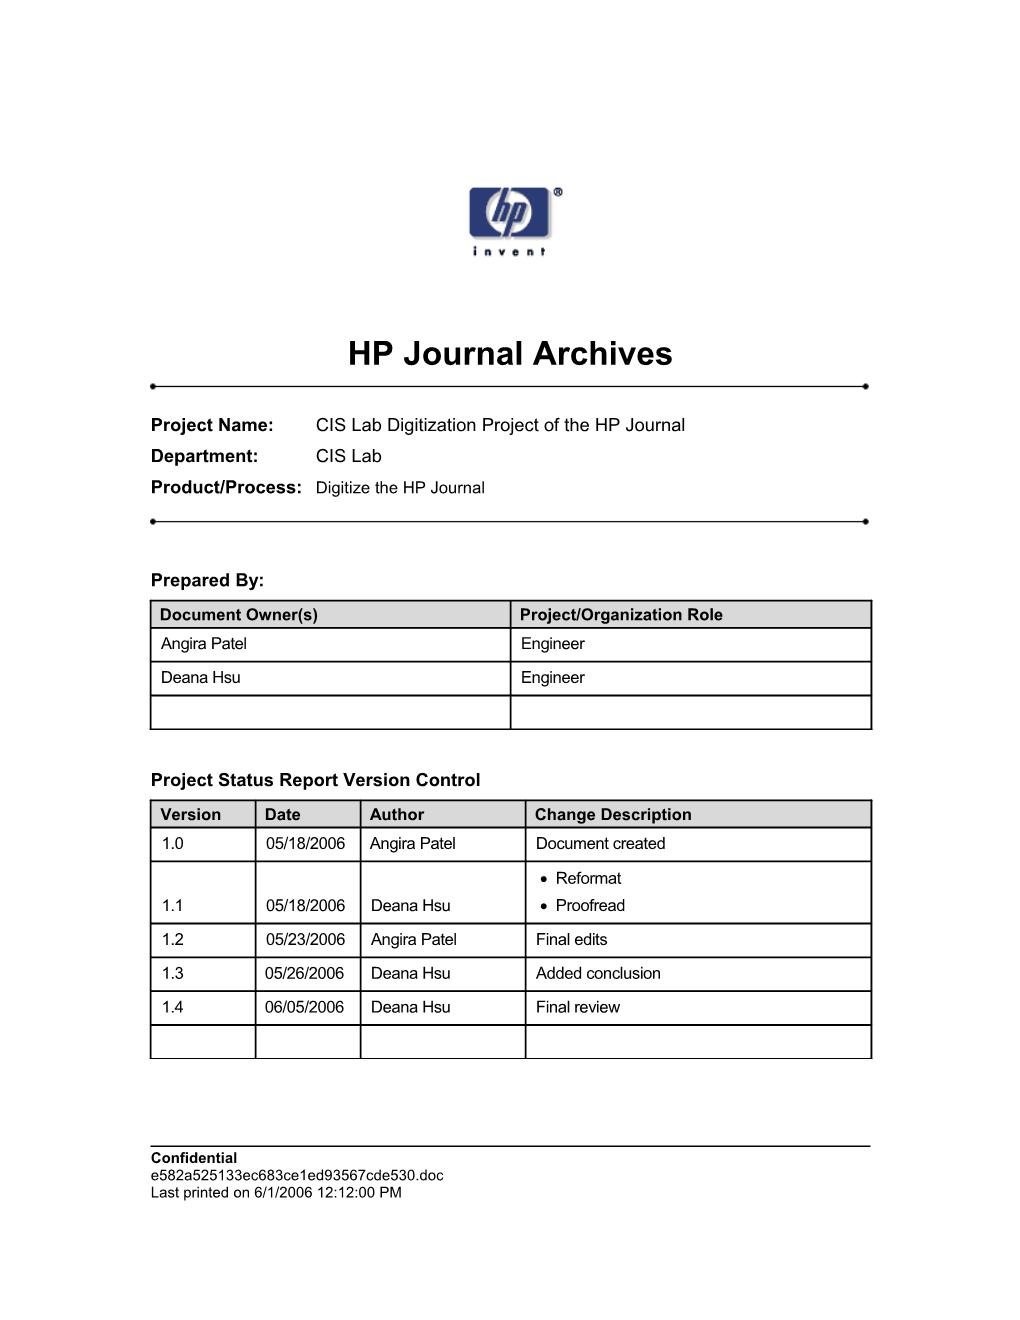 Project Name:CIS Lab Digitization Project of the HP Journal